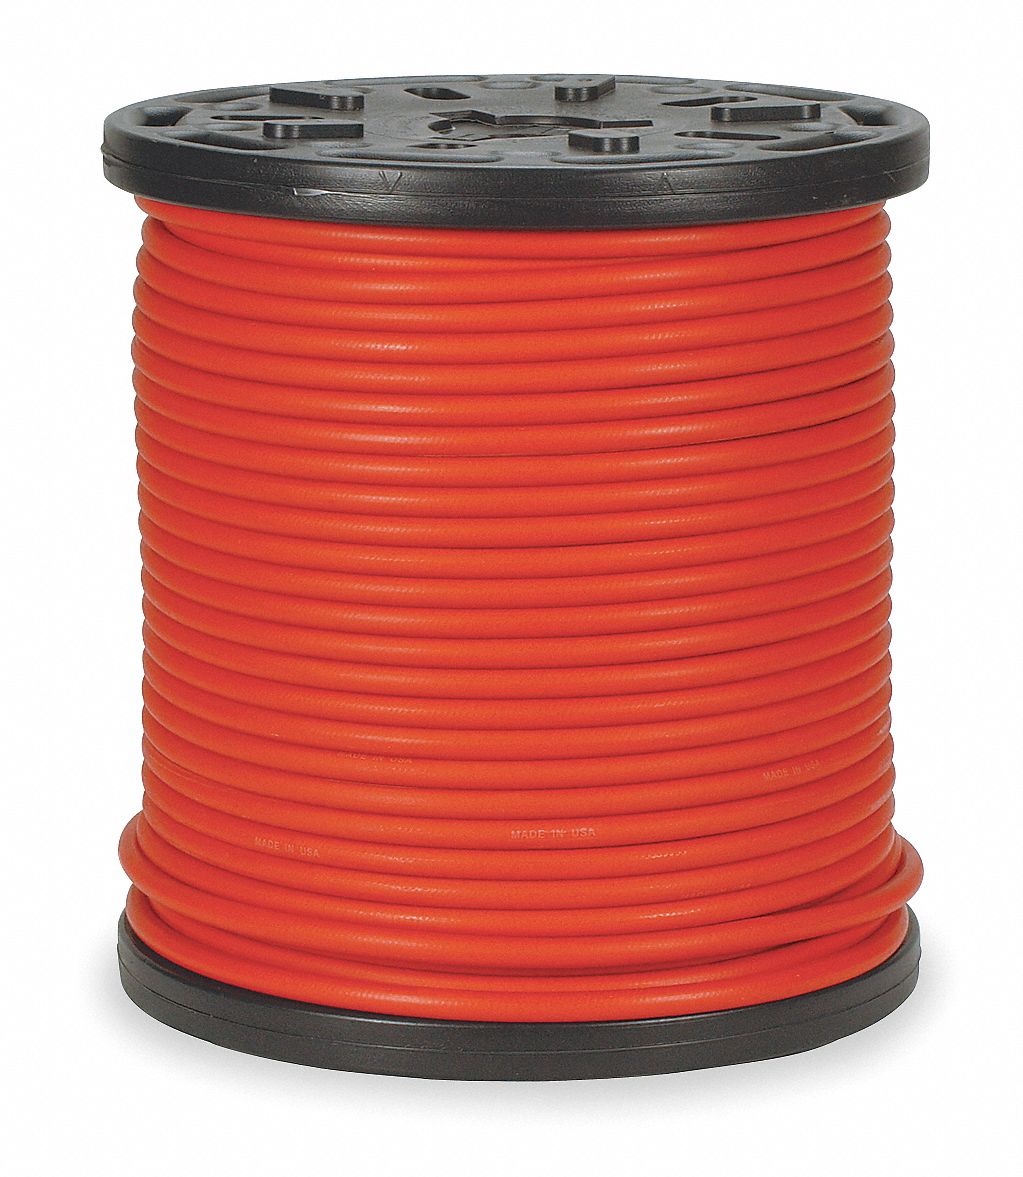 Rolair 1/4In x 50Ft Noodle Air Compressor Hose with Fittings